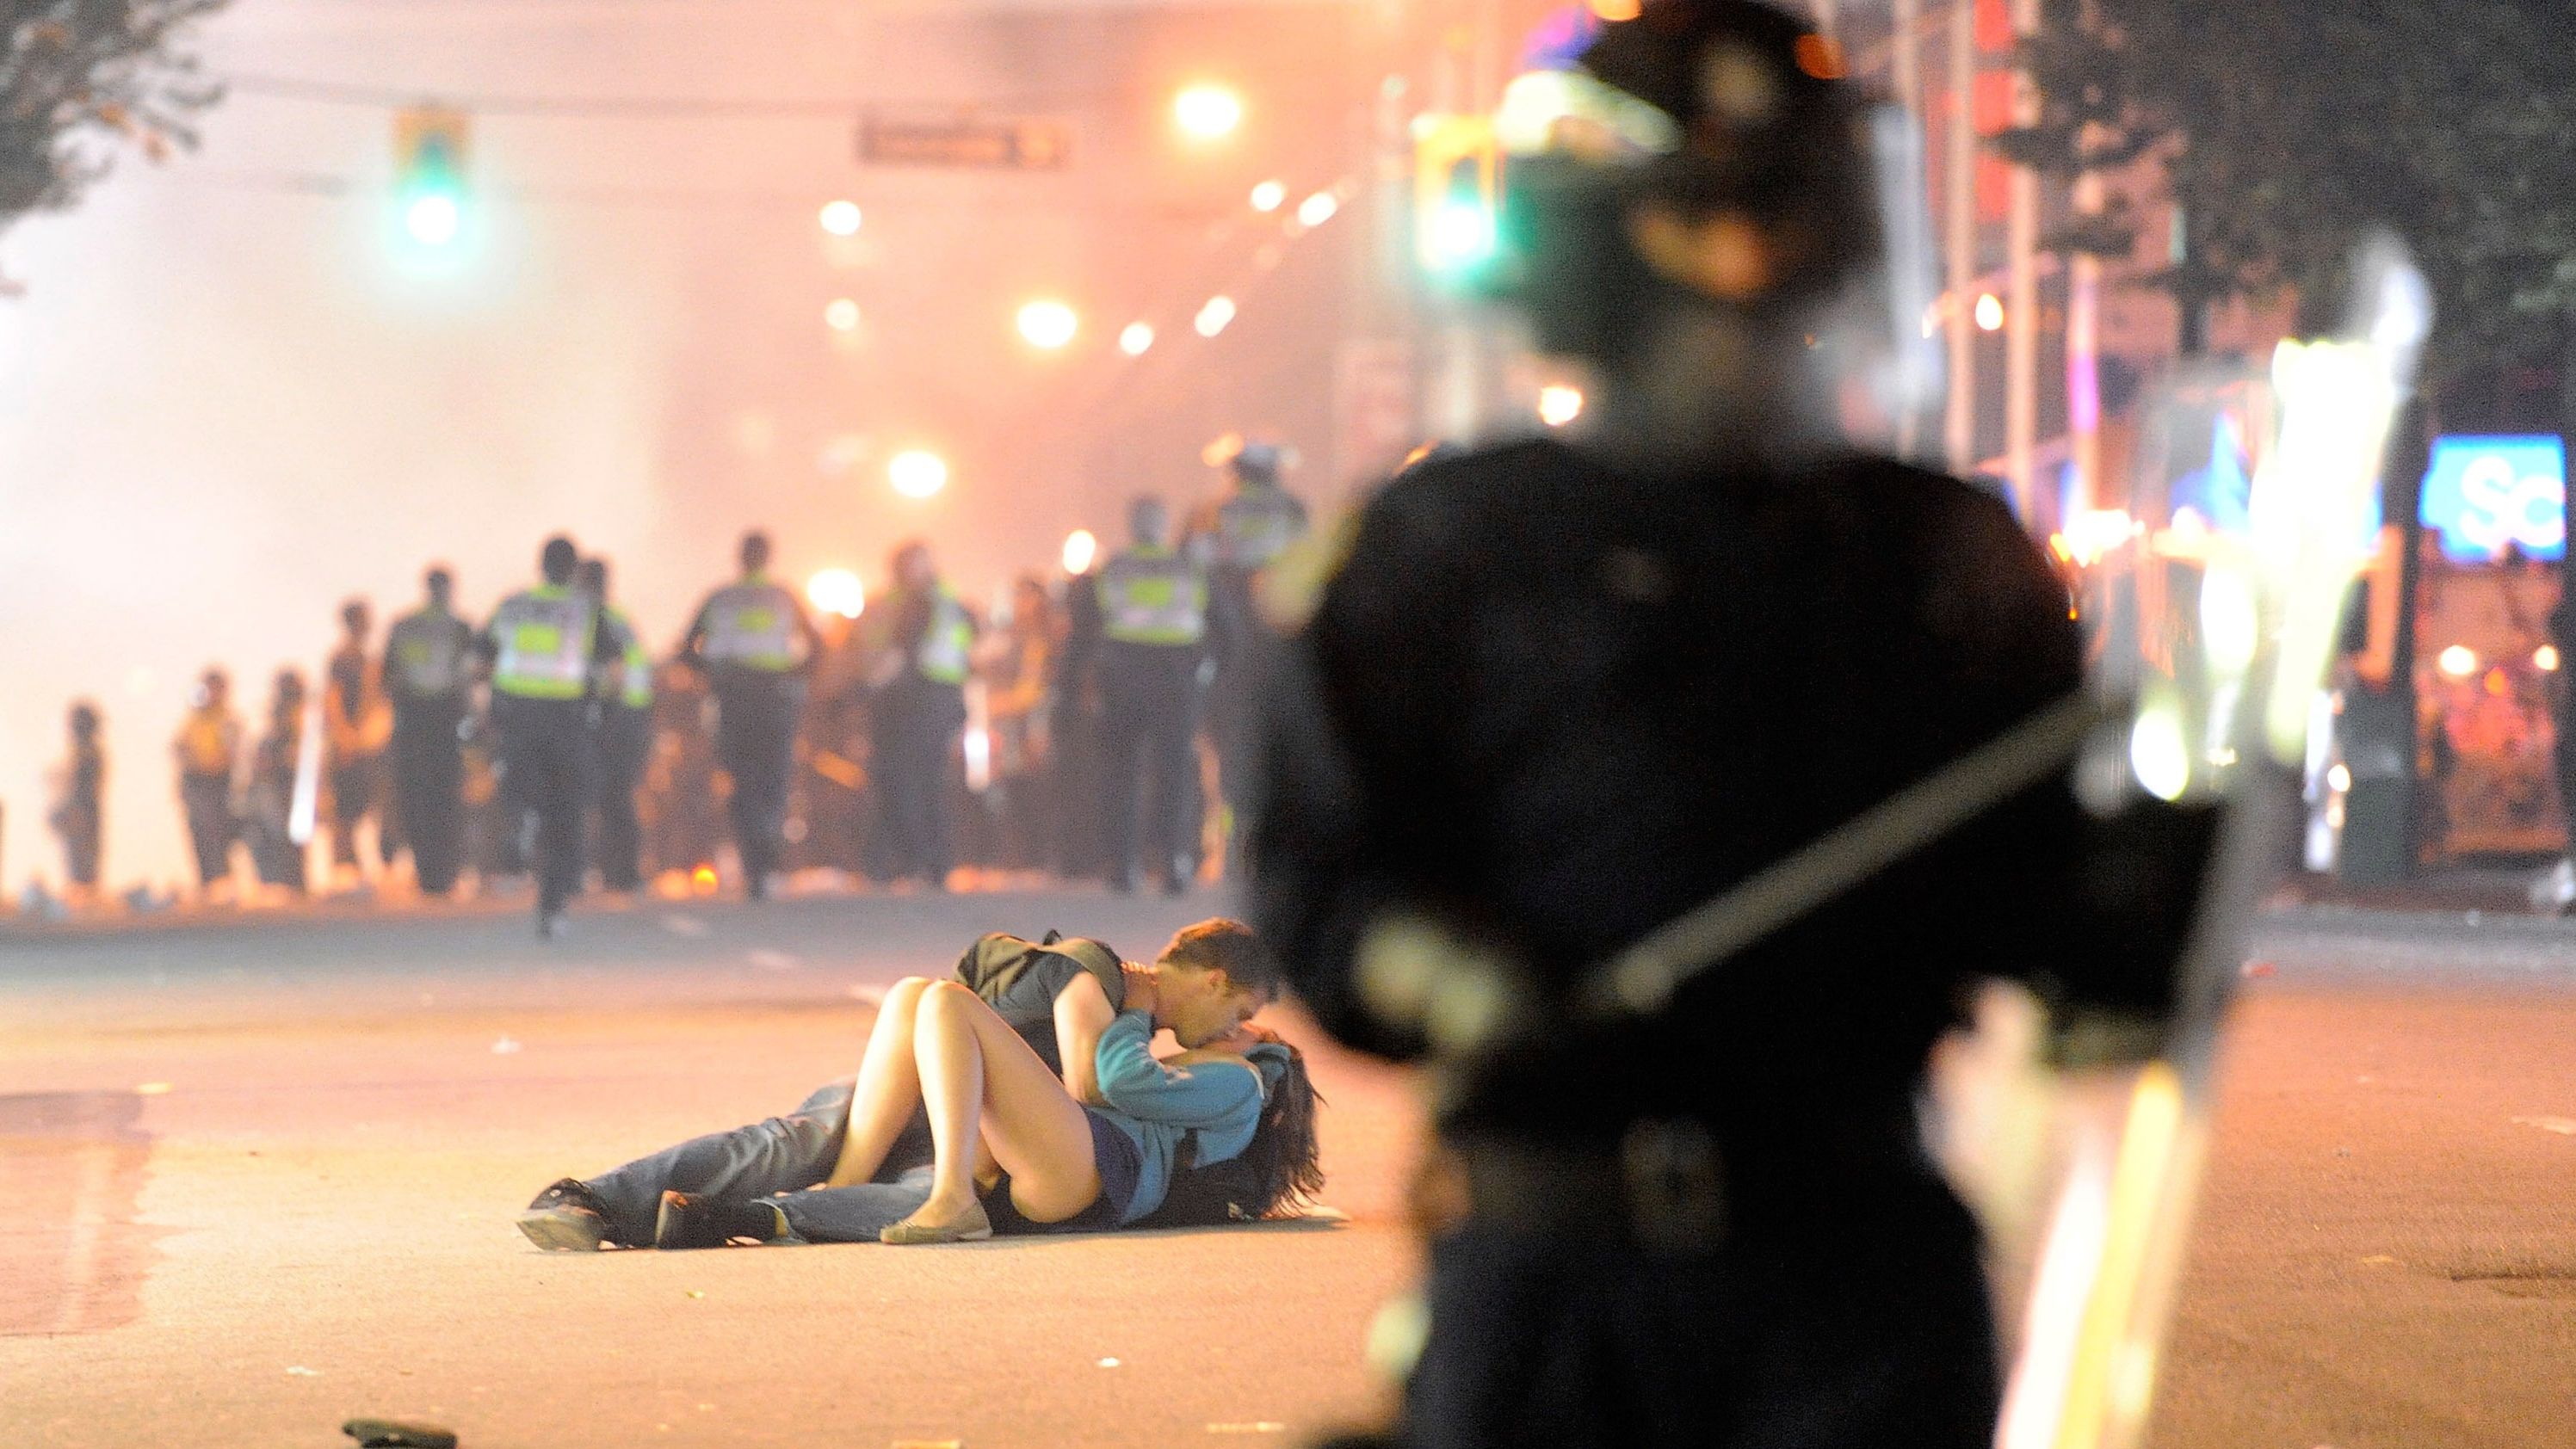 A couple kisses on a street after riots broke out in Vancouver, British Columbia, in June 2011. Angry hockey fans, fuming over their team's loss in the Stanley Cup Final, <a href="https://www.cnn.com/2011/10/31/world/americas/canada-riots/index.html" target="_blank">wreaked havoc</a> across downtown sections of Vancouver.